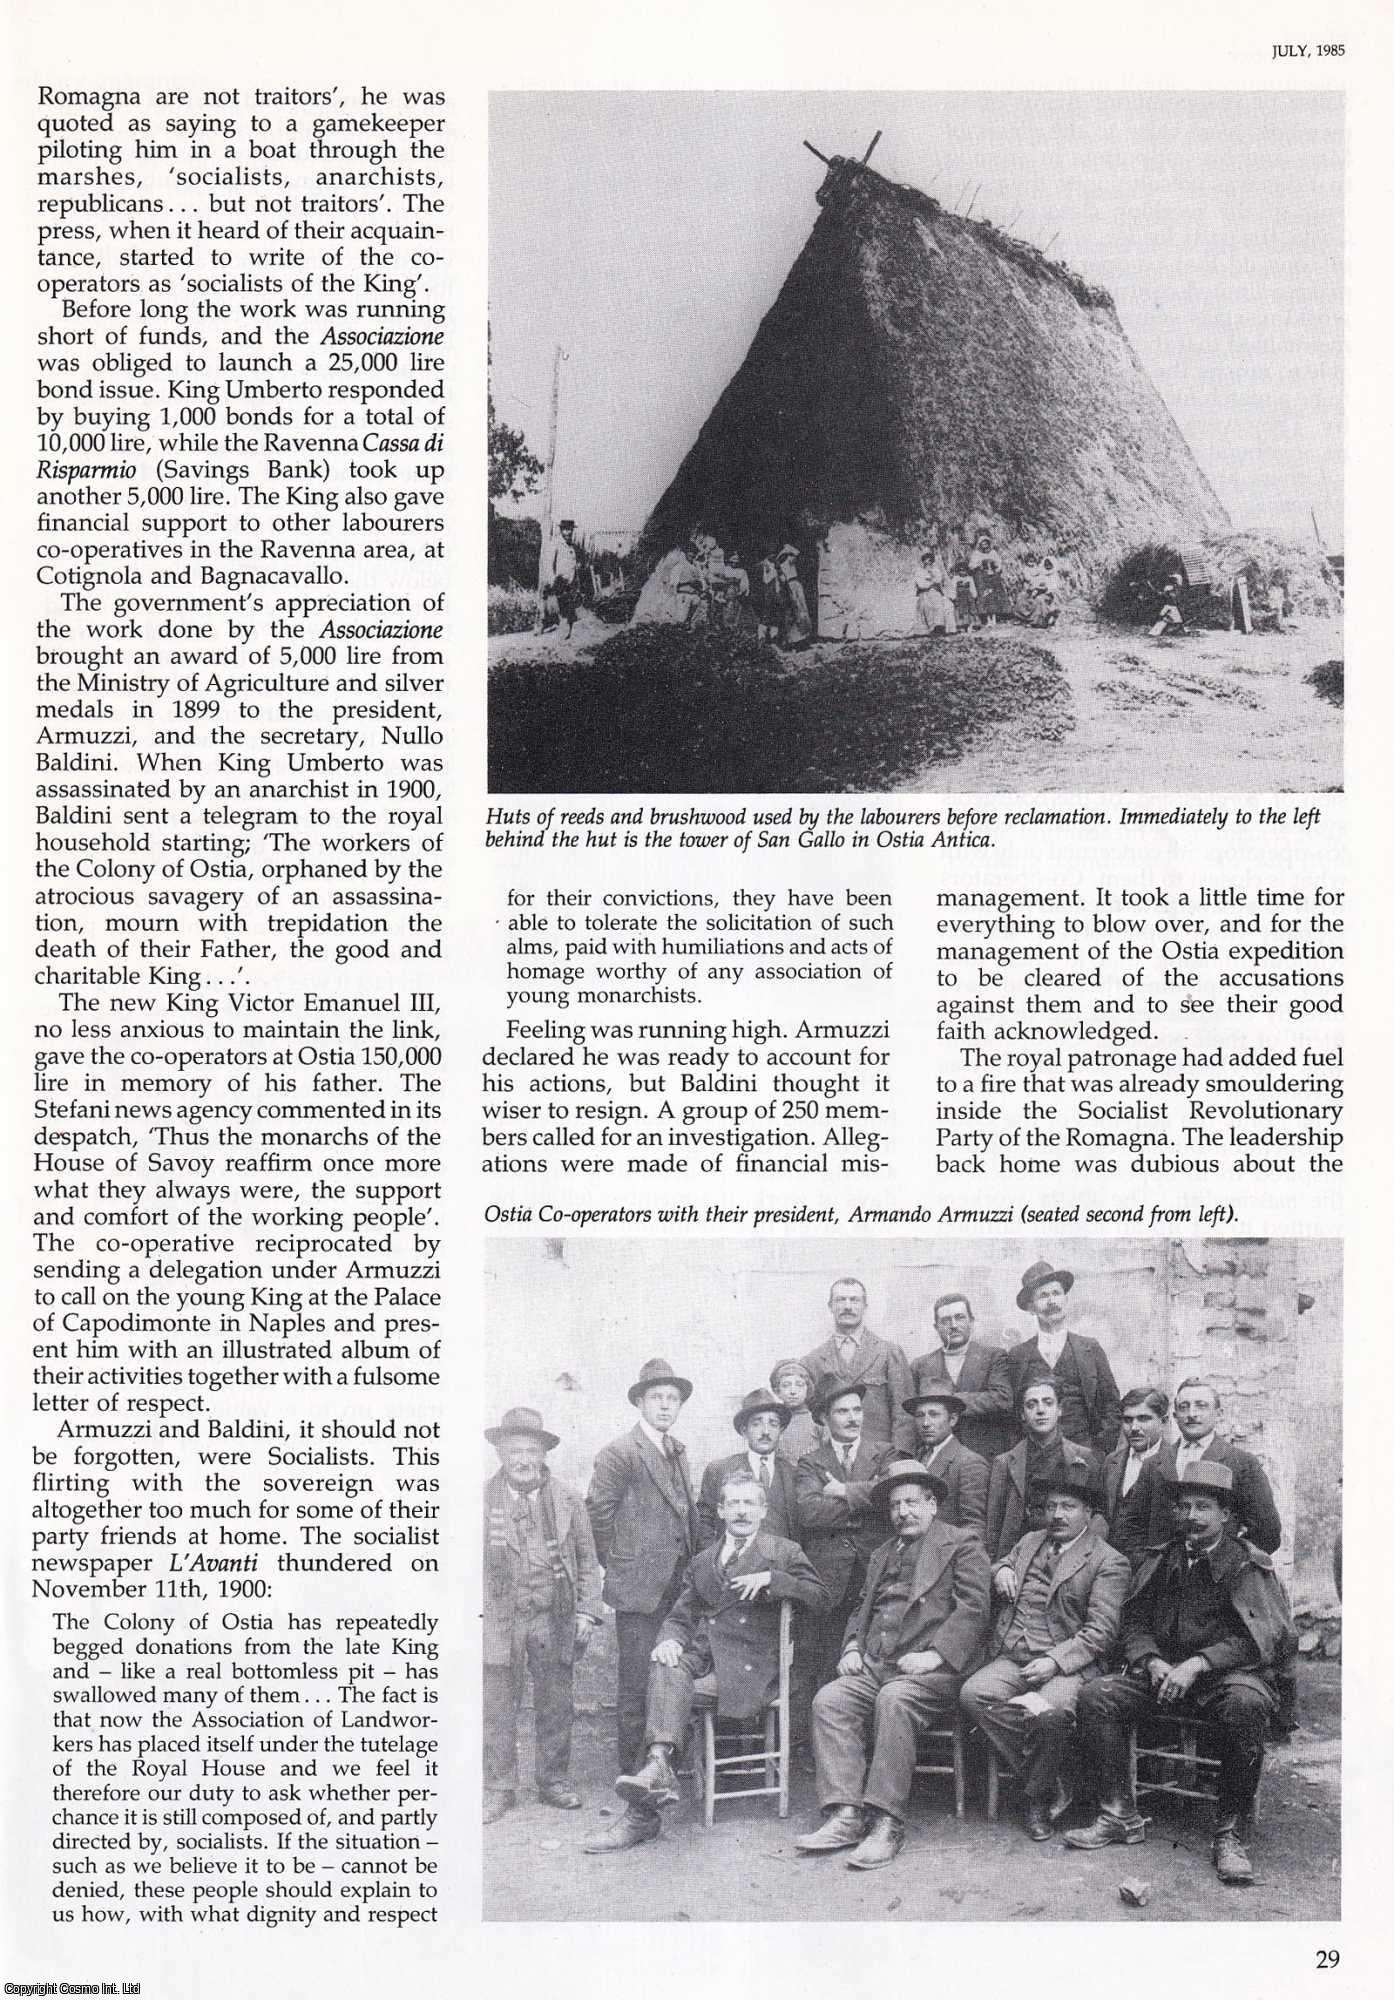 John Earle - Draining the Ostia Marshes: An Italian Co-operative Achievement. An original article from History Today, 1985.